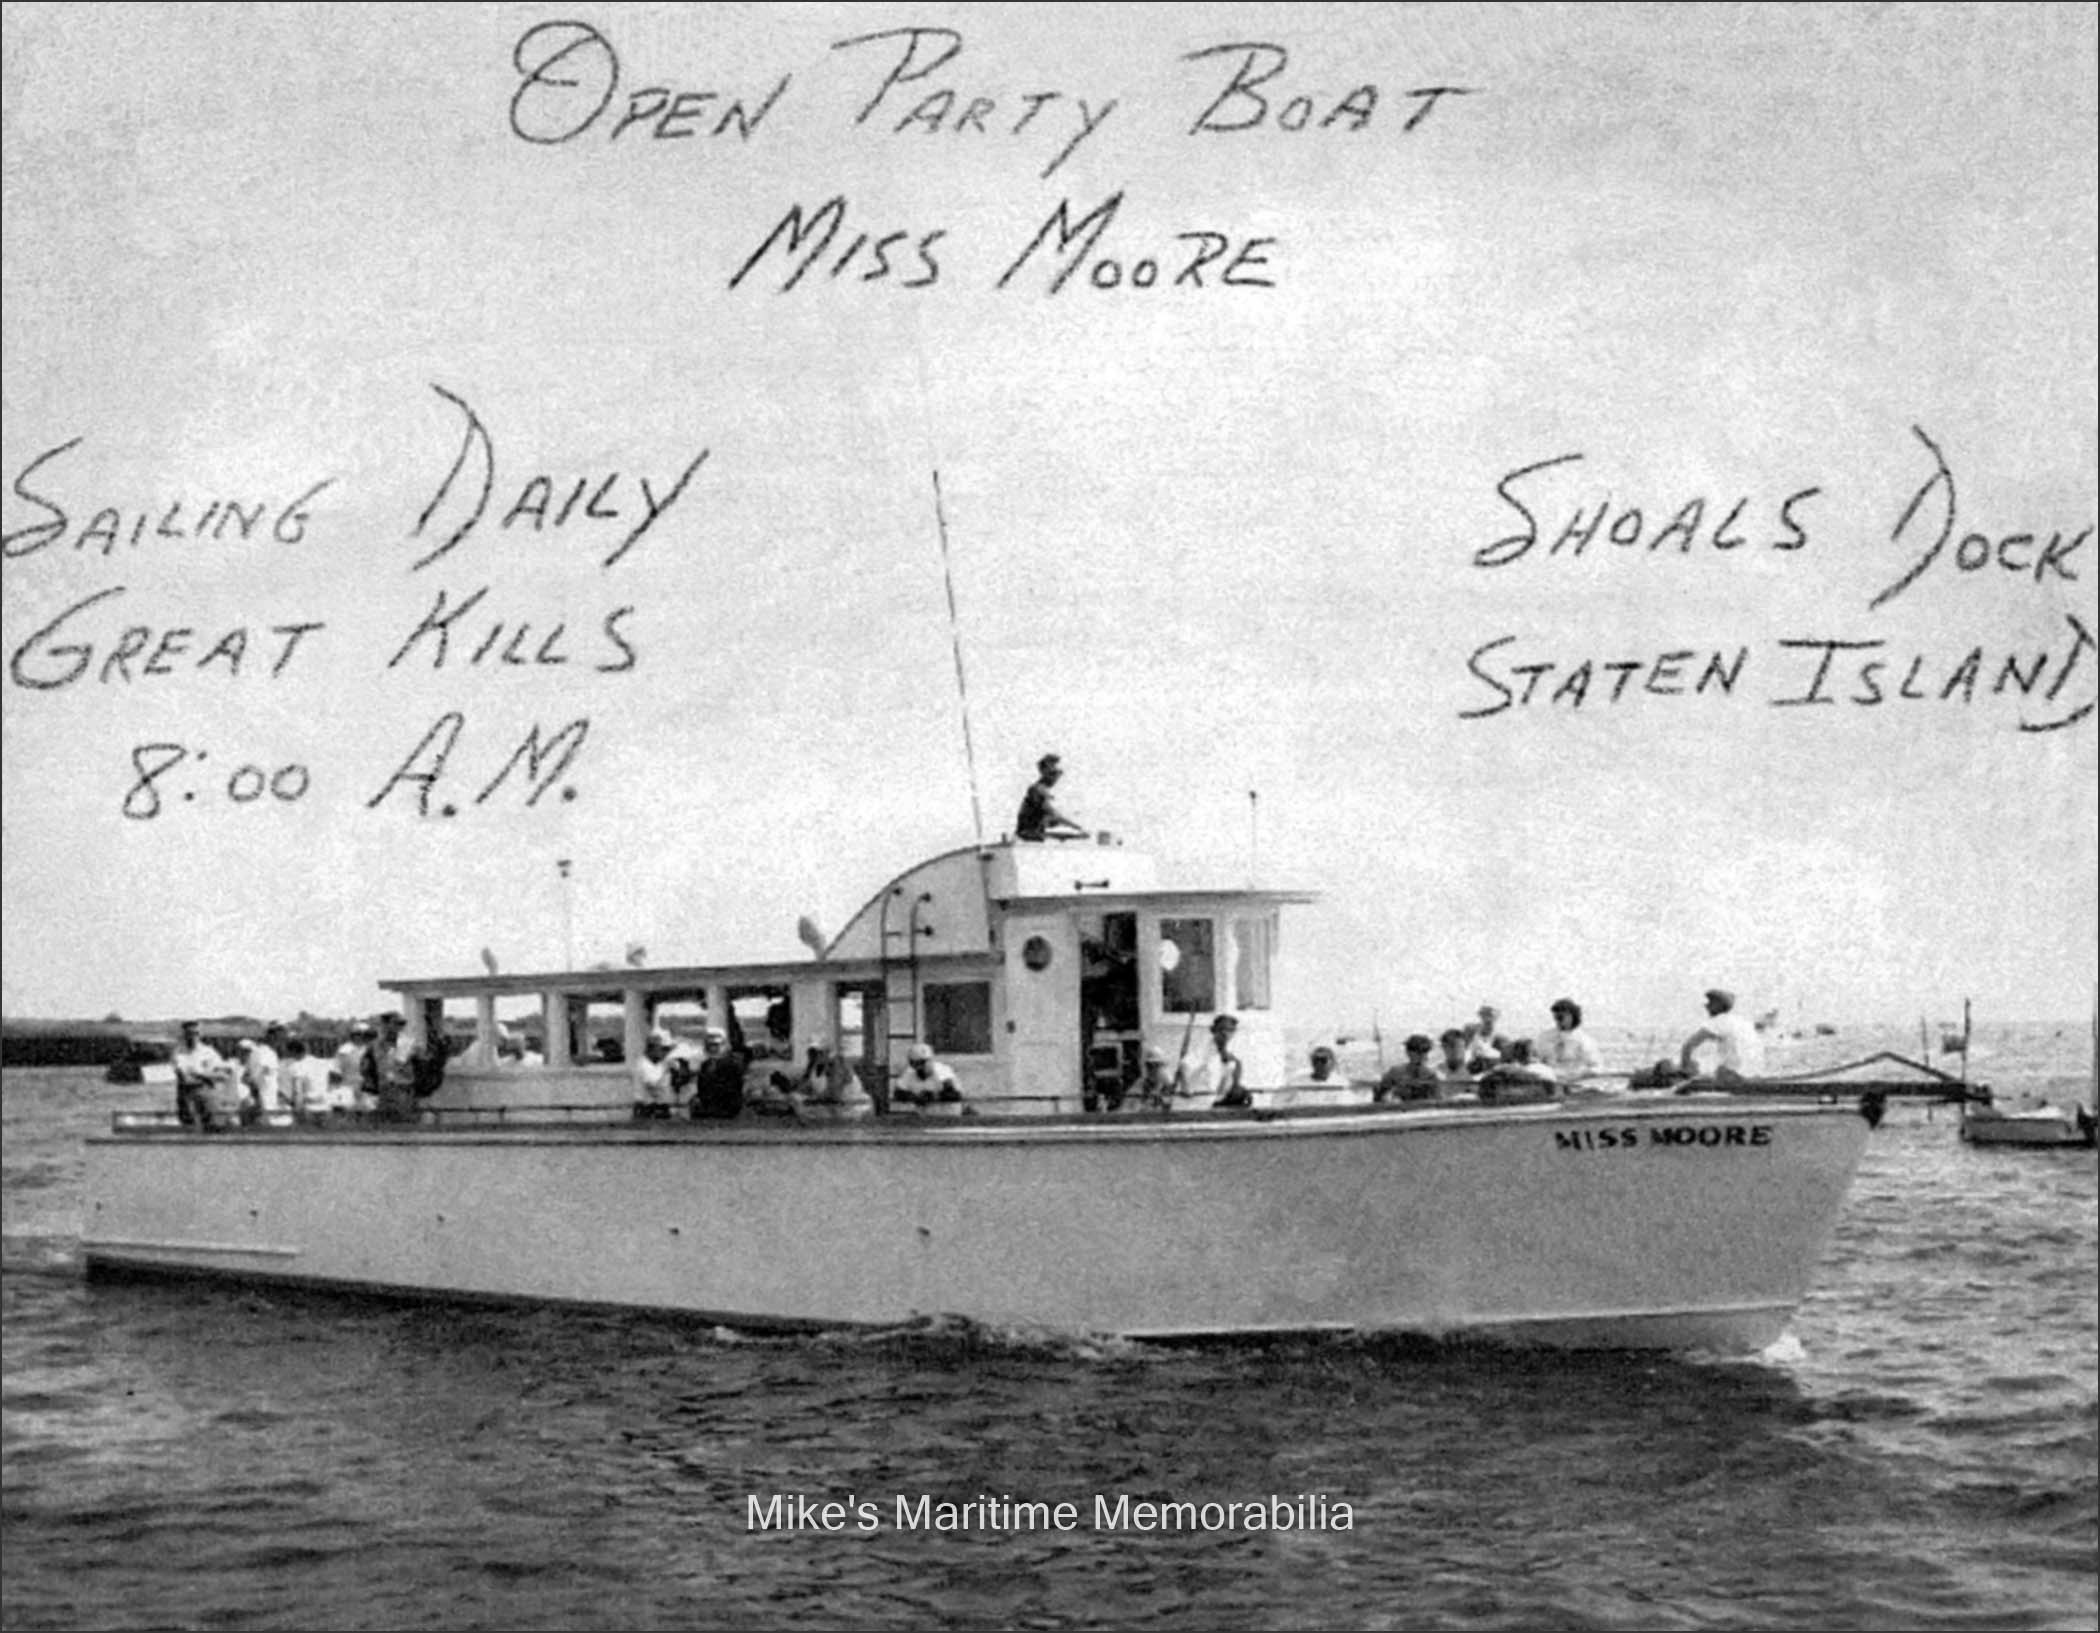 MISS MOORE, Great Kills, NY – 1959 The "MISS MOORE" from Shoals Dock, Great Kills, Staten Island, NY circa 1959. She was skippered by Captains Everett "Evie" and Freddie Moore. This was the first "MISS MOORE" and was a converted 63-foot World War II Air-Sea Rescue boat built in 1943 at Miami, FL as the U.S. Navy ARB "C-16505". She was previously named the "SUDS III" and sailed from Atlantic City, NJ and after sailing as the "MISS MOORE" became Captain Ron Santee's second "FISHERMEN" from Atlantic Highlands, NJ. After that, she sailed as John Larsen's "DEEP ADVENTURES" from Point Pleasant, NJ, and then as the "PECONIC STAR" from Greenport, NY, and last sailed as the "ALMA" from Wisconsin. The photo is courtesy of Ken Ekberg.